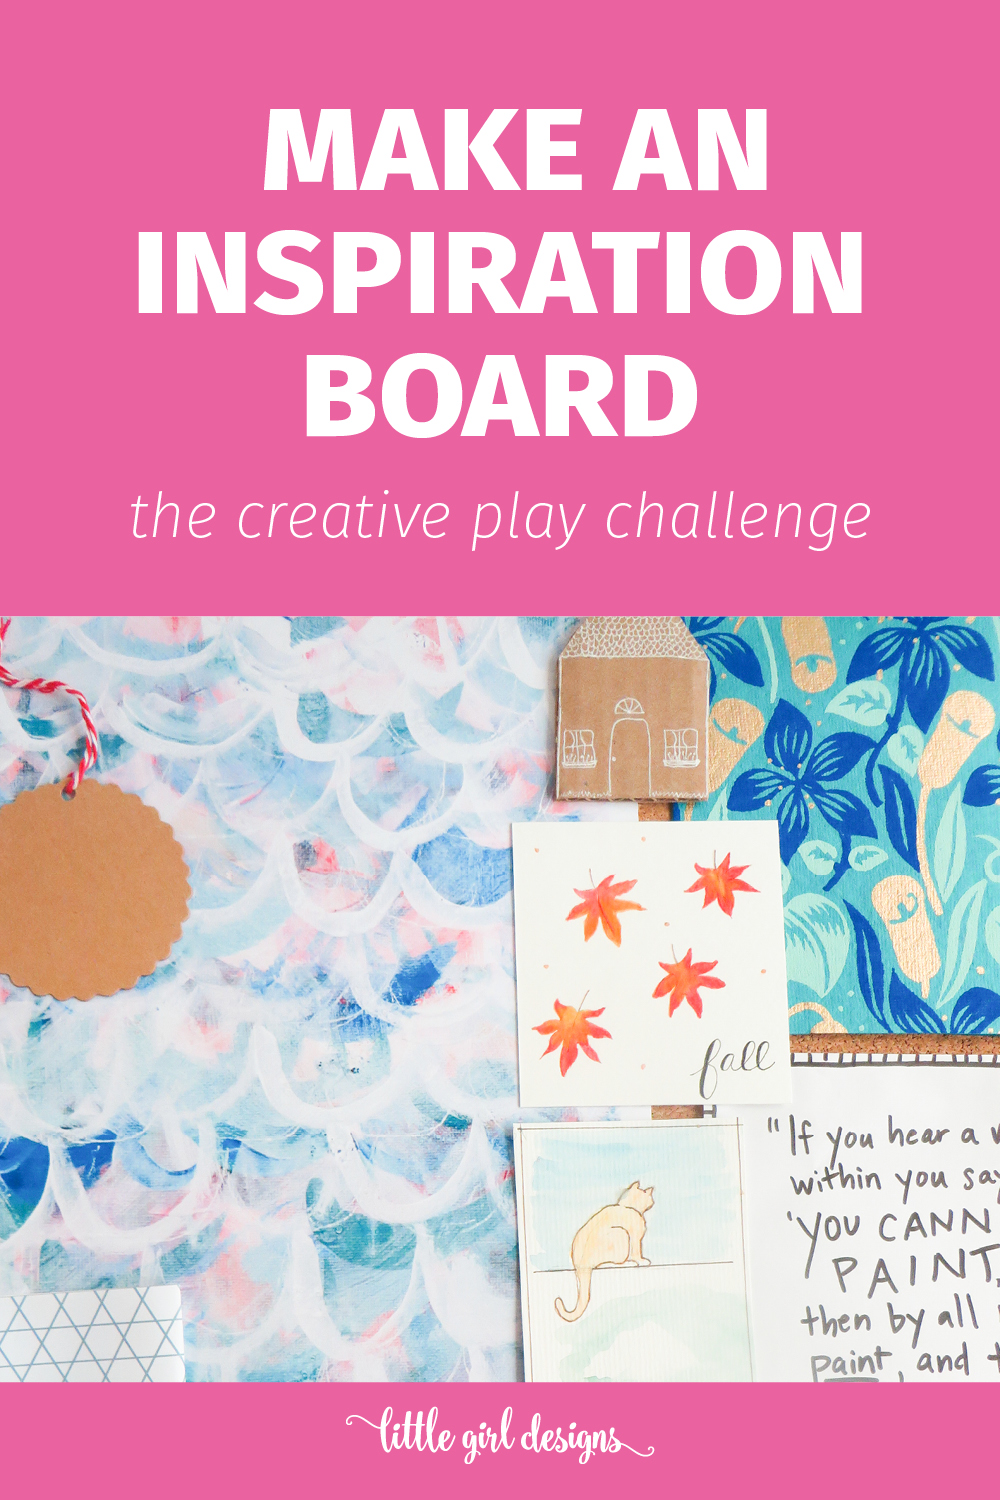 How to Make an Inspiration Board